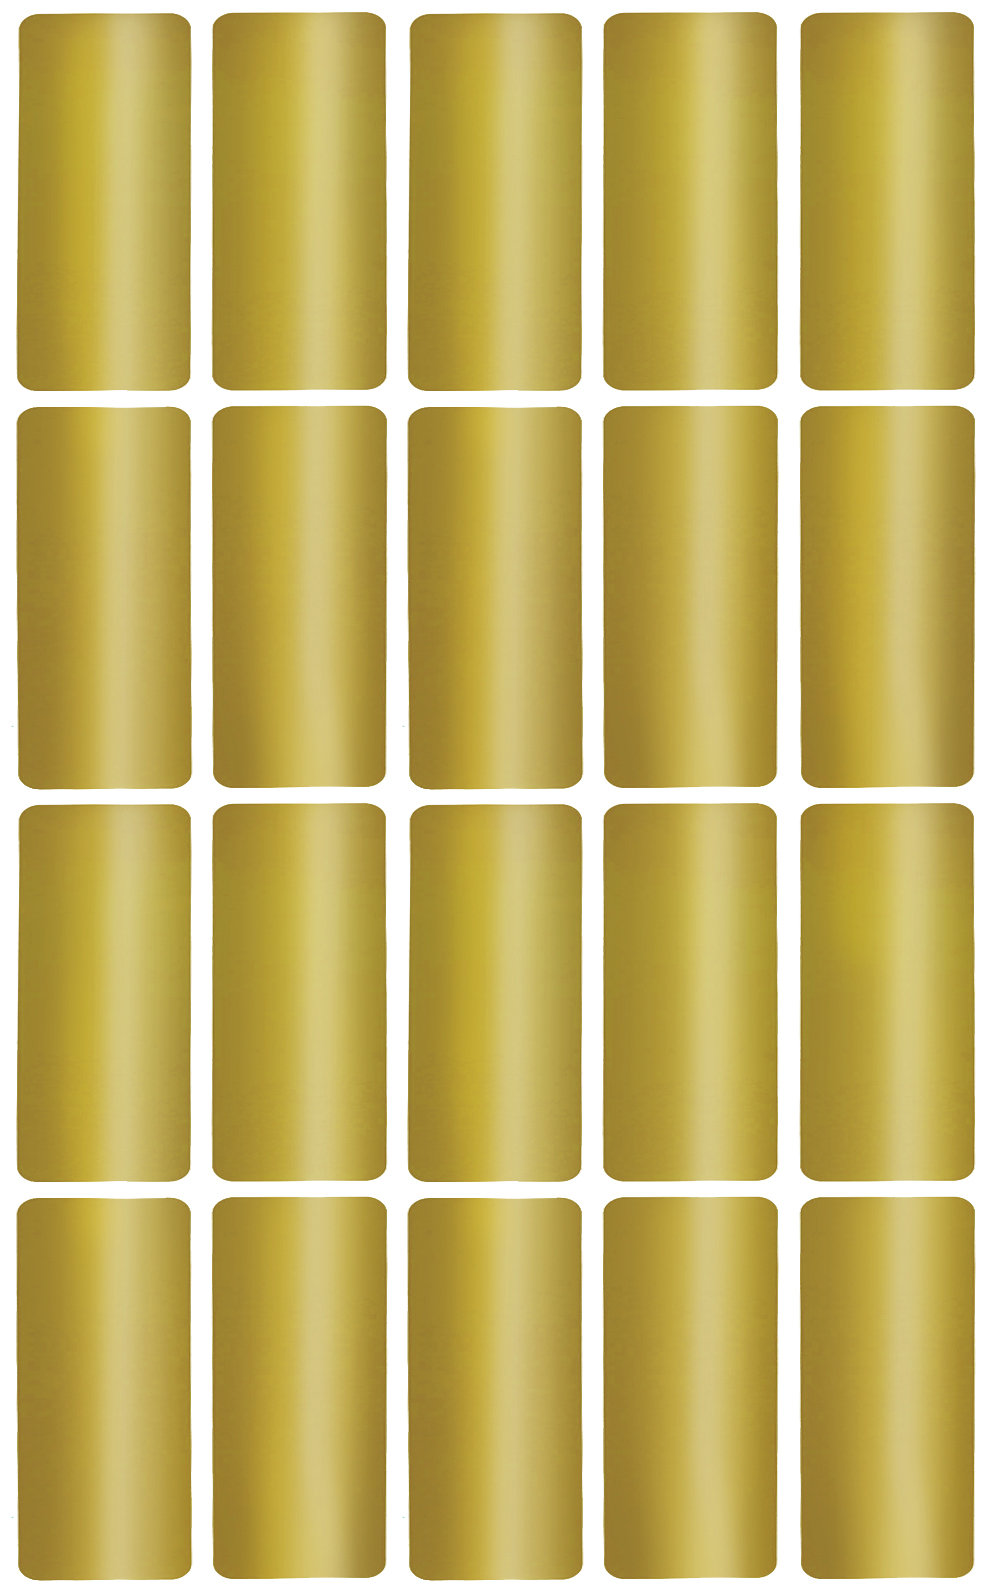 Rectangular Gold Stickers Adhesive Labels Rectangle 40mm x 19mm (1.57 inch  x 0.75) Great for Envelope Seals and All Purpose - 300 Pack by Royal Green